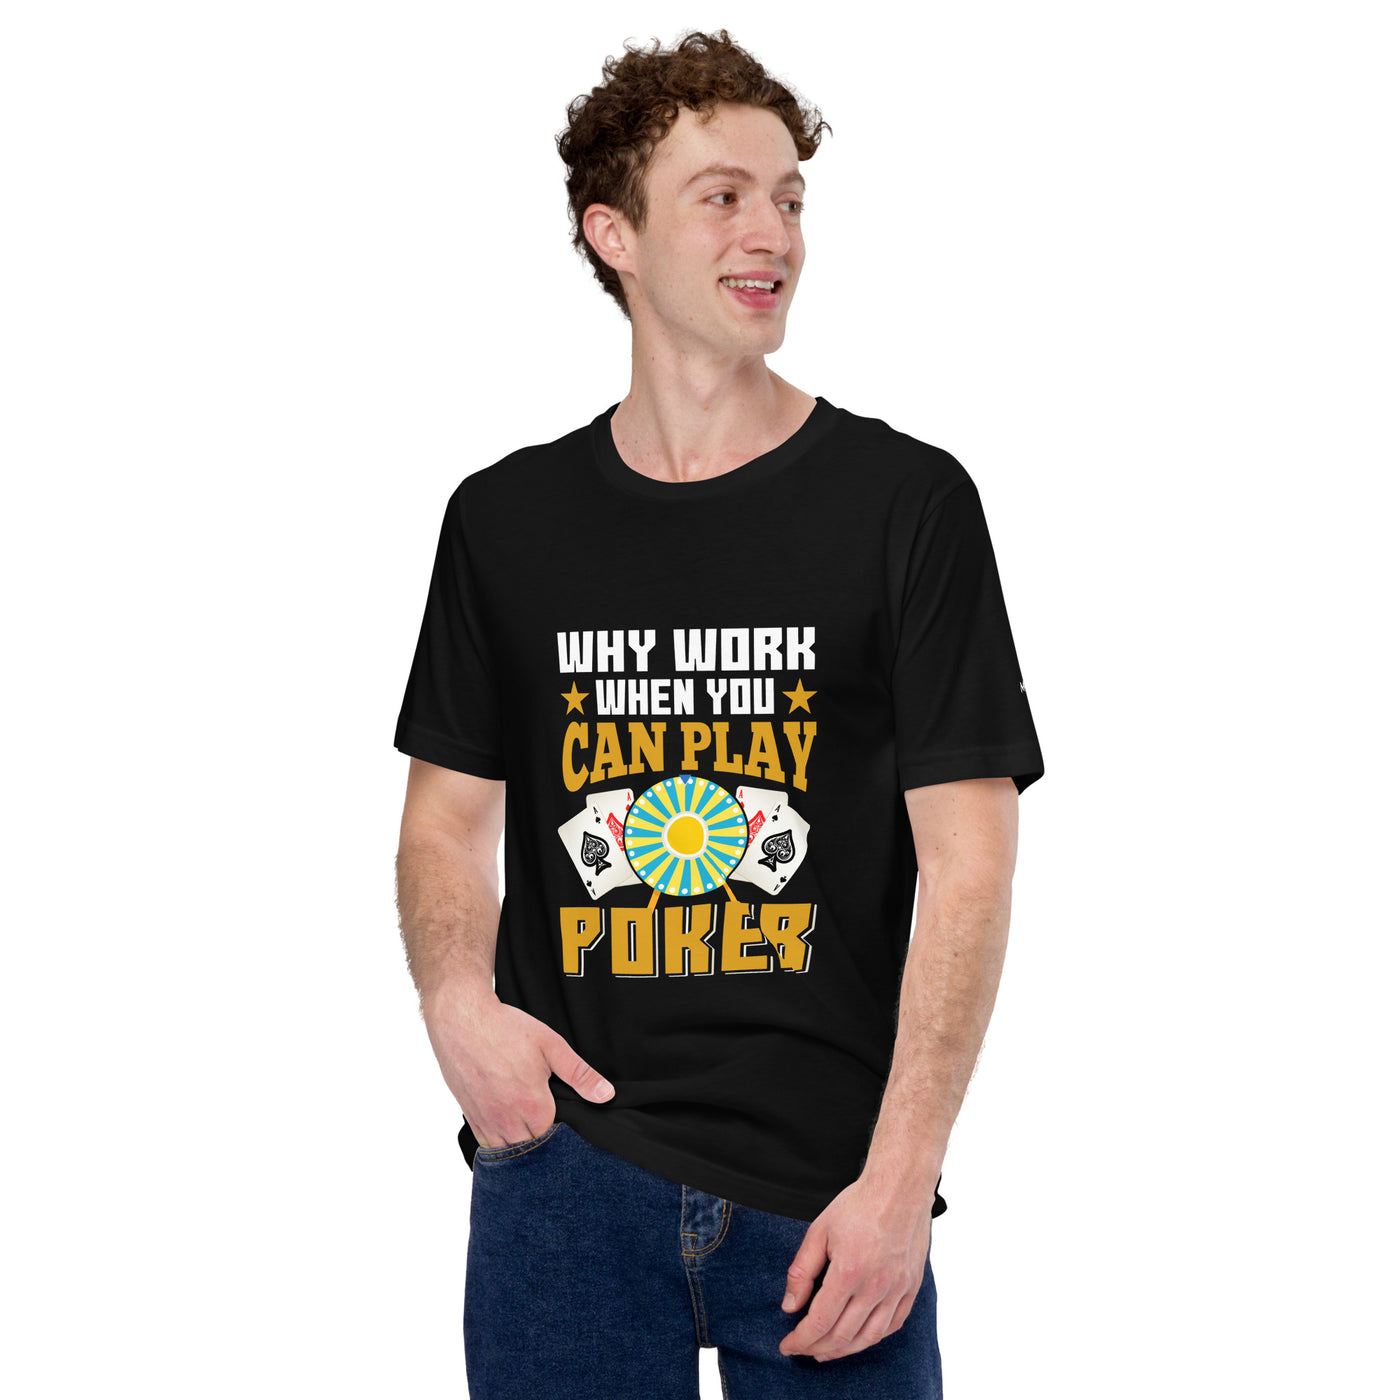 Why Work when you can Play Poker - Unisex t-shirt